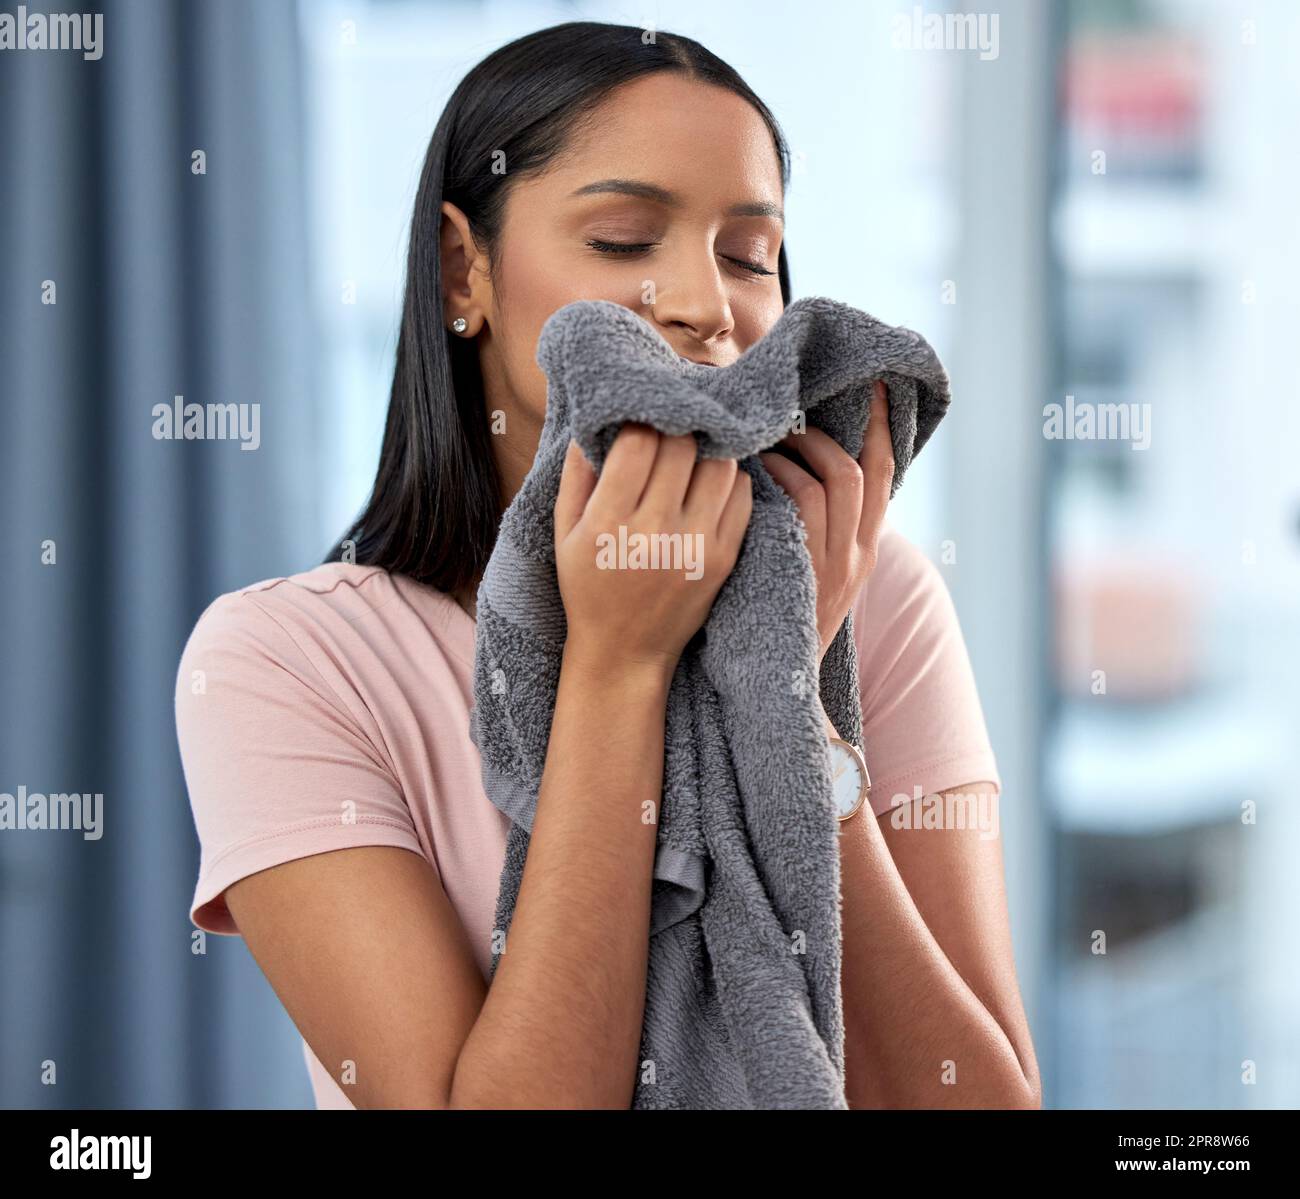 When all else fails, cleaning house is the perfect antidote. a young woman smelling a towel at home. Stock Photo